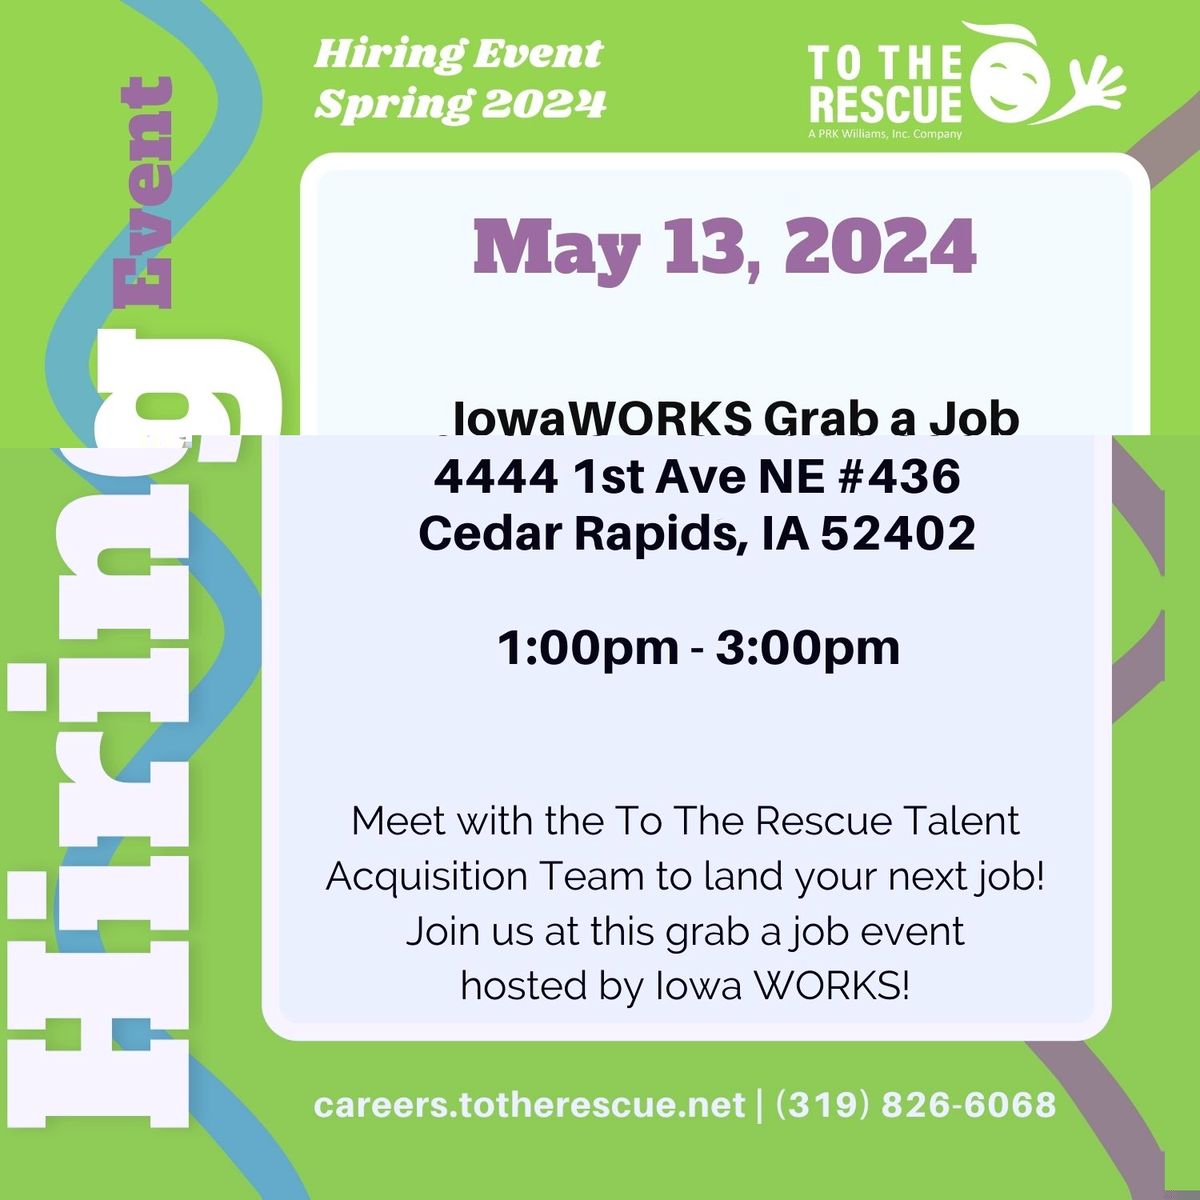 To The Rescue Iowa WORKS Grab a Job